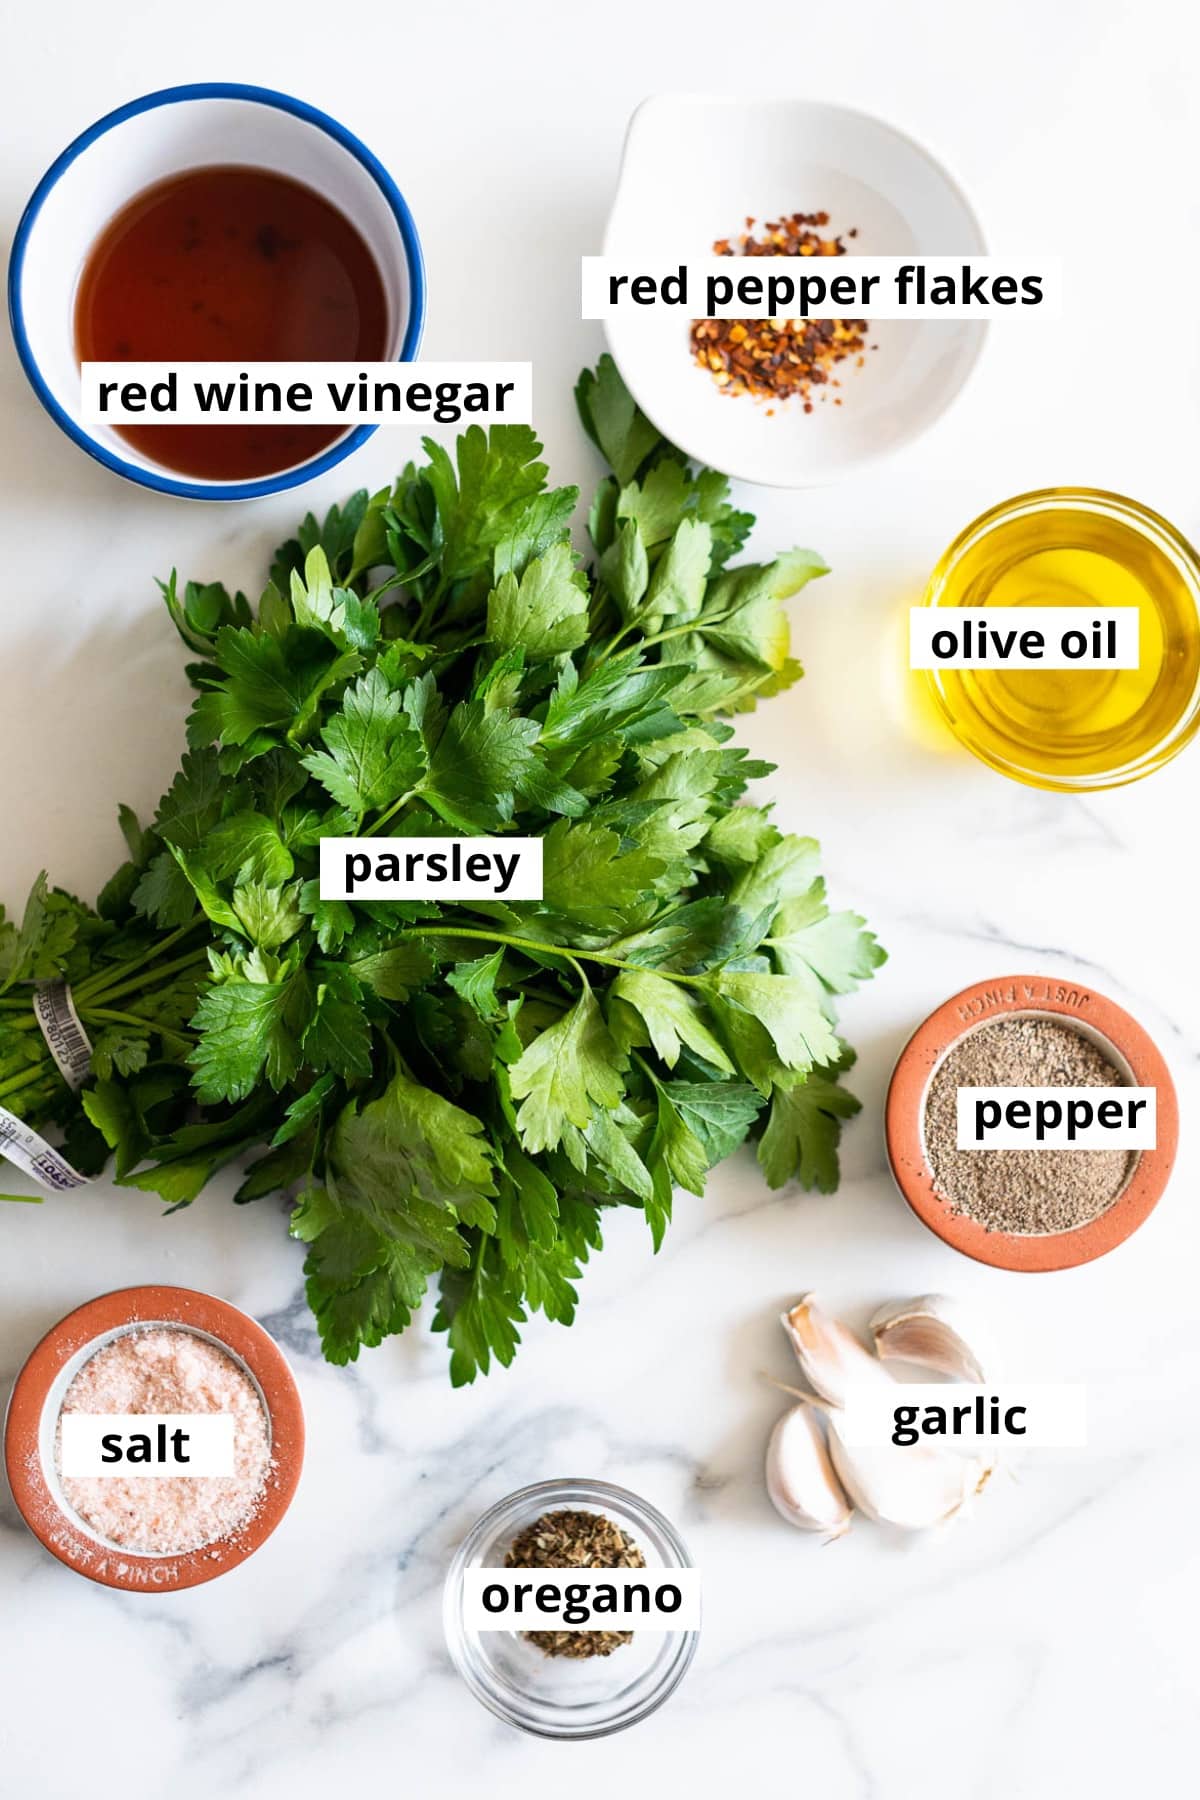 Red wine vinegar, red pepper flakes, olive oil, bunch of parsley, garlic, dried oregano, salt and pepper.